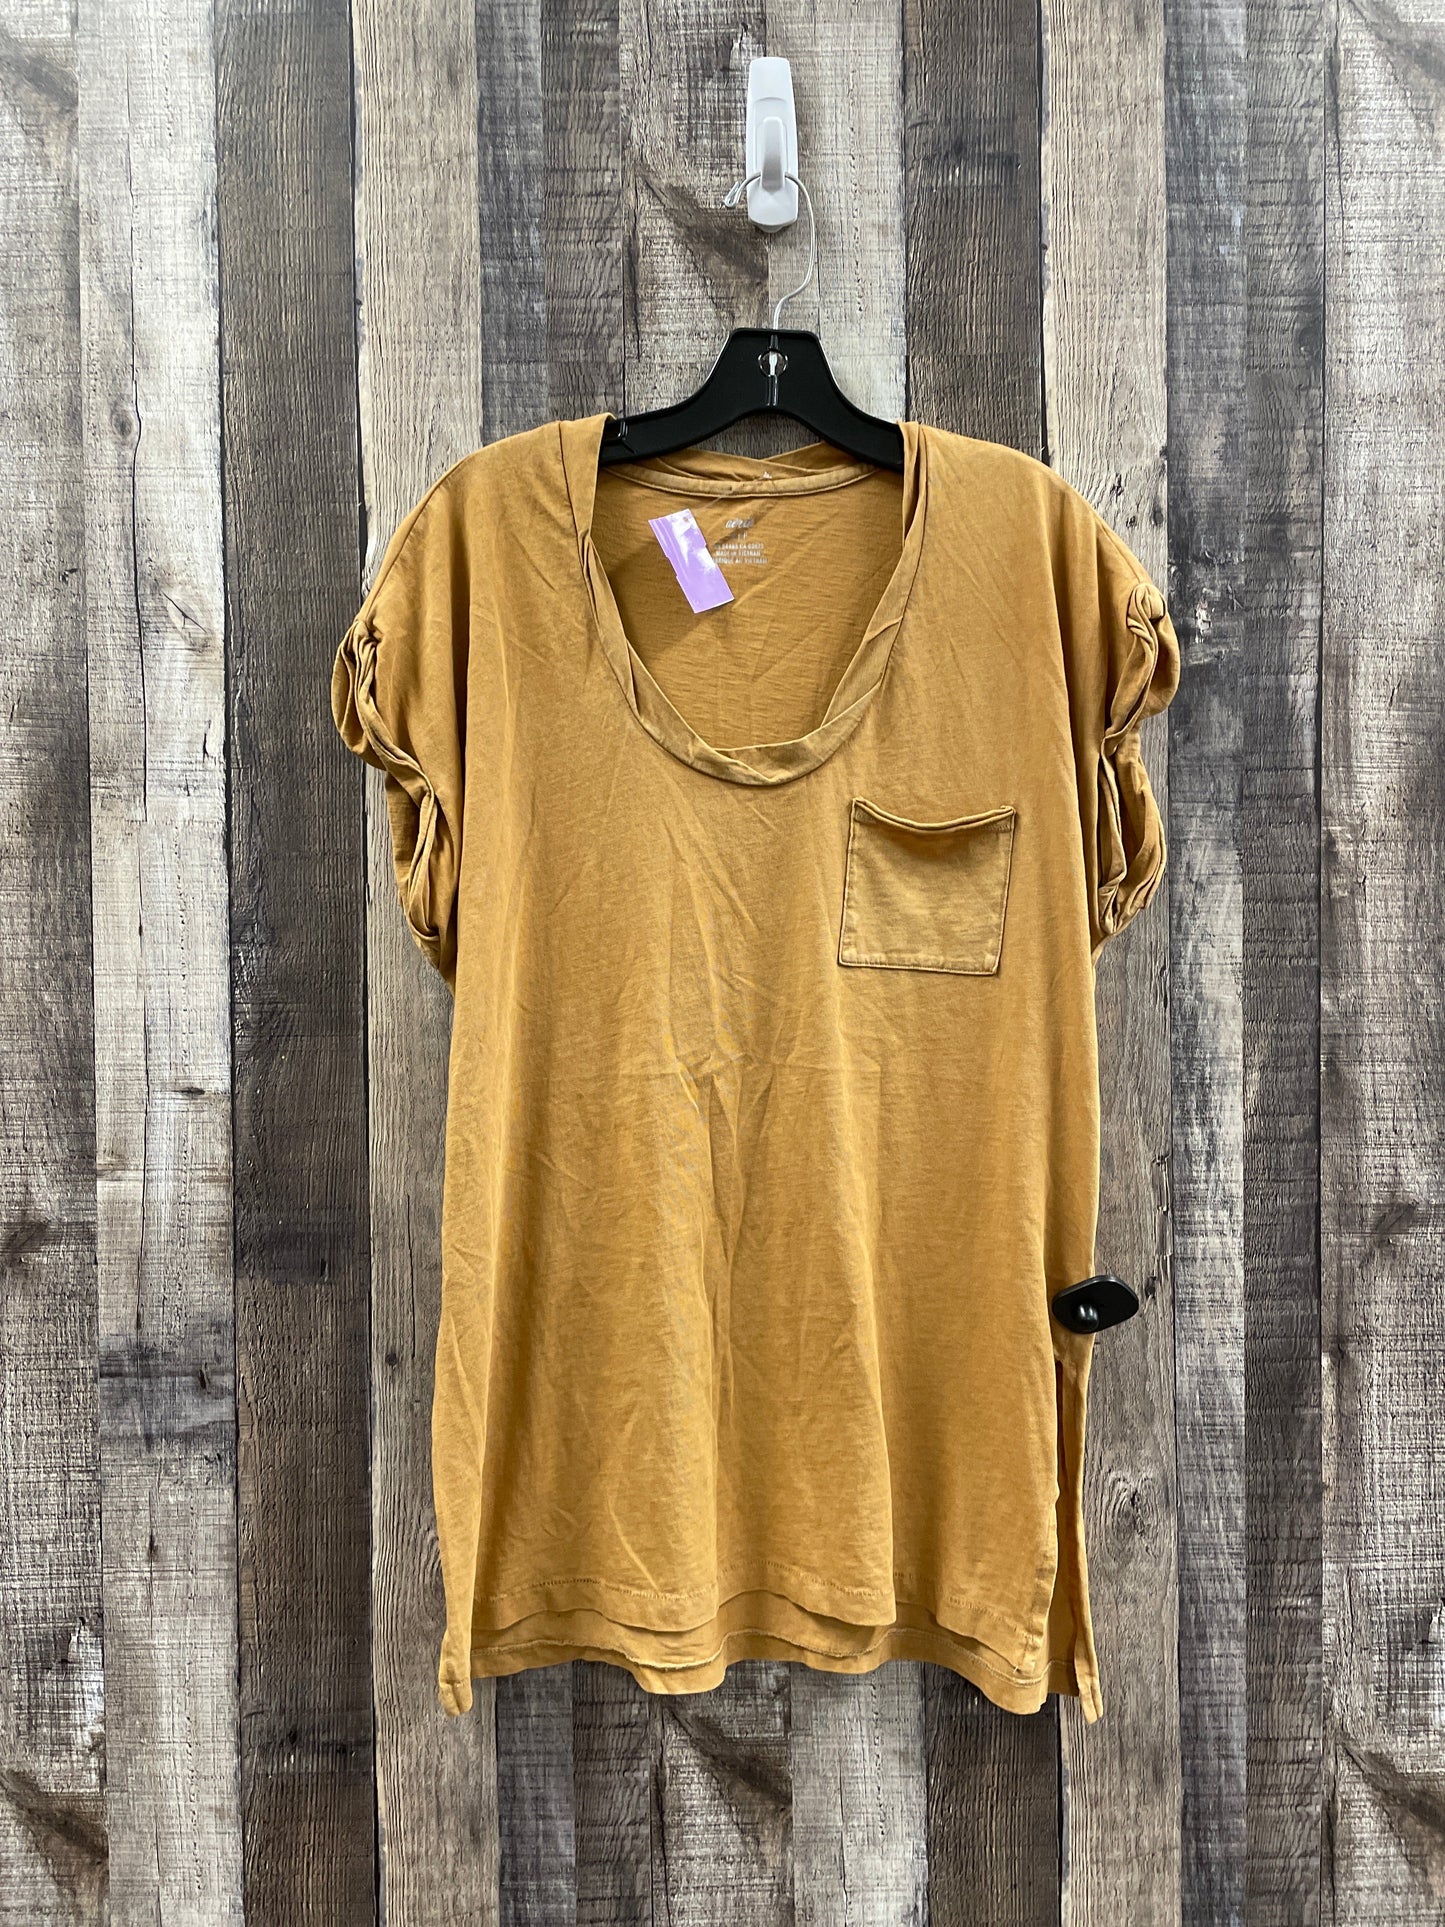 Gold Top Sleeveless Aerie, Size S